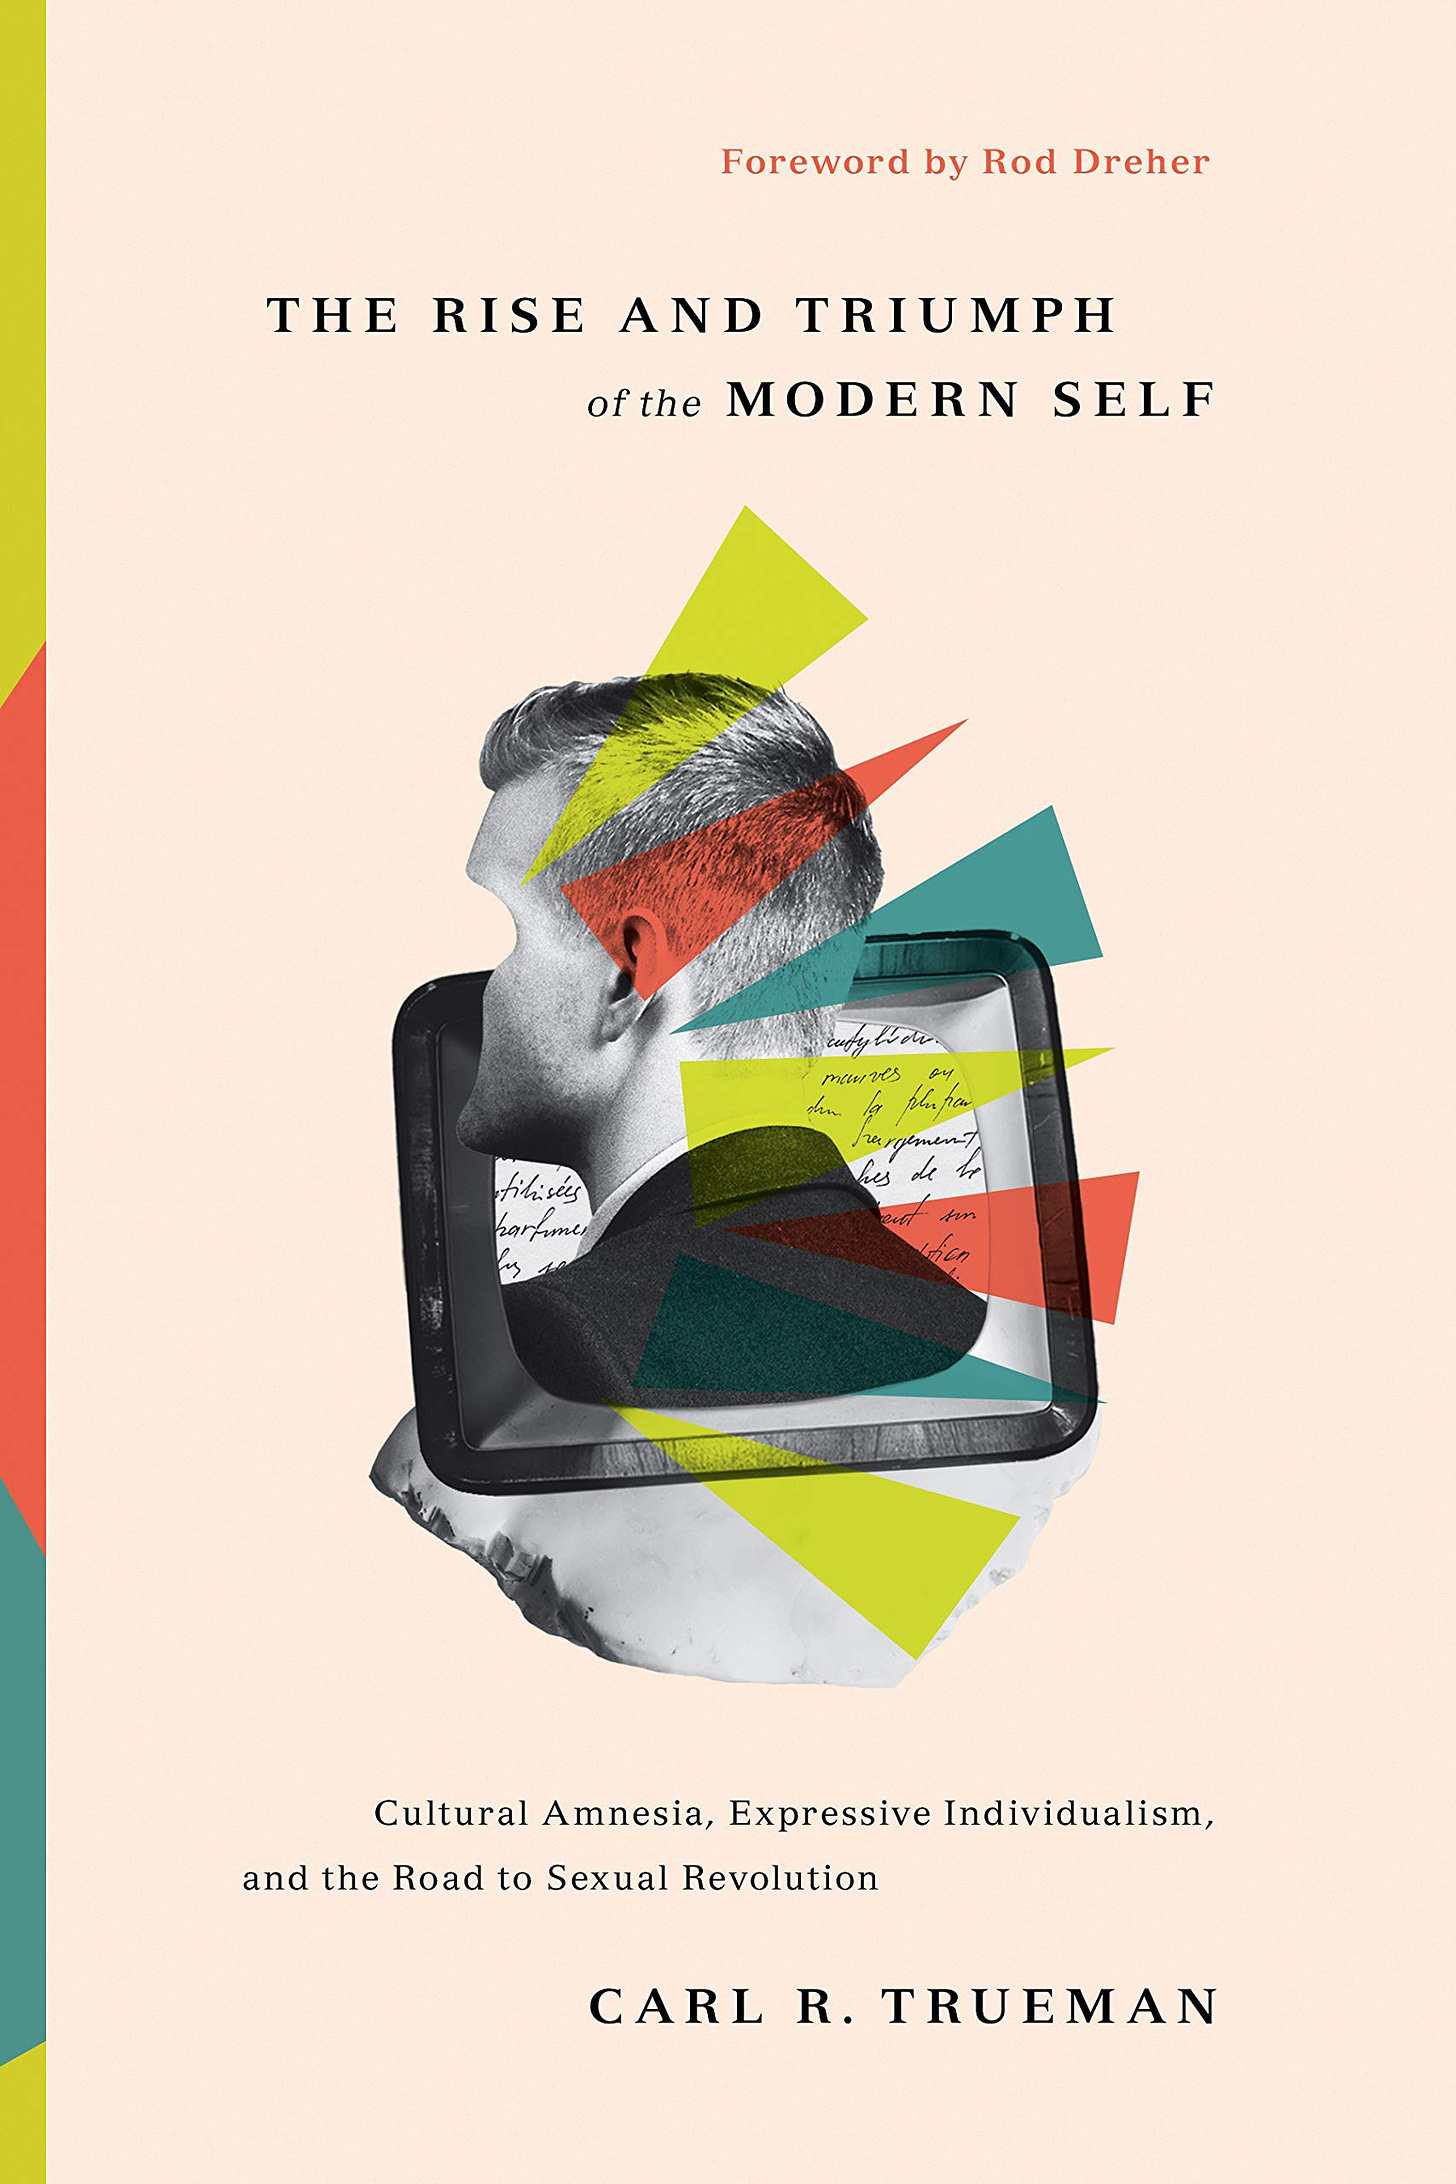 The Rise and Triumph of the Modern Self: Cultural Amnesia, Expressive  Individualism, and the Road to Sexual Revolution: Trueman, Carl R., Dreher,  Rod: 9781433556333: Amazon.com: Books